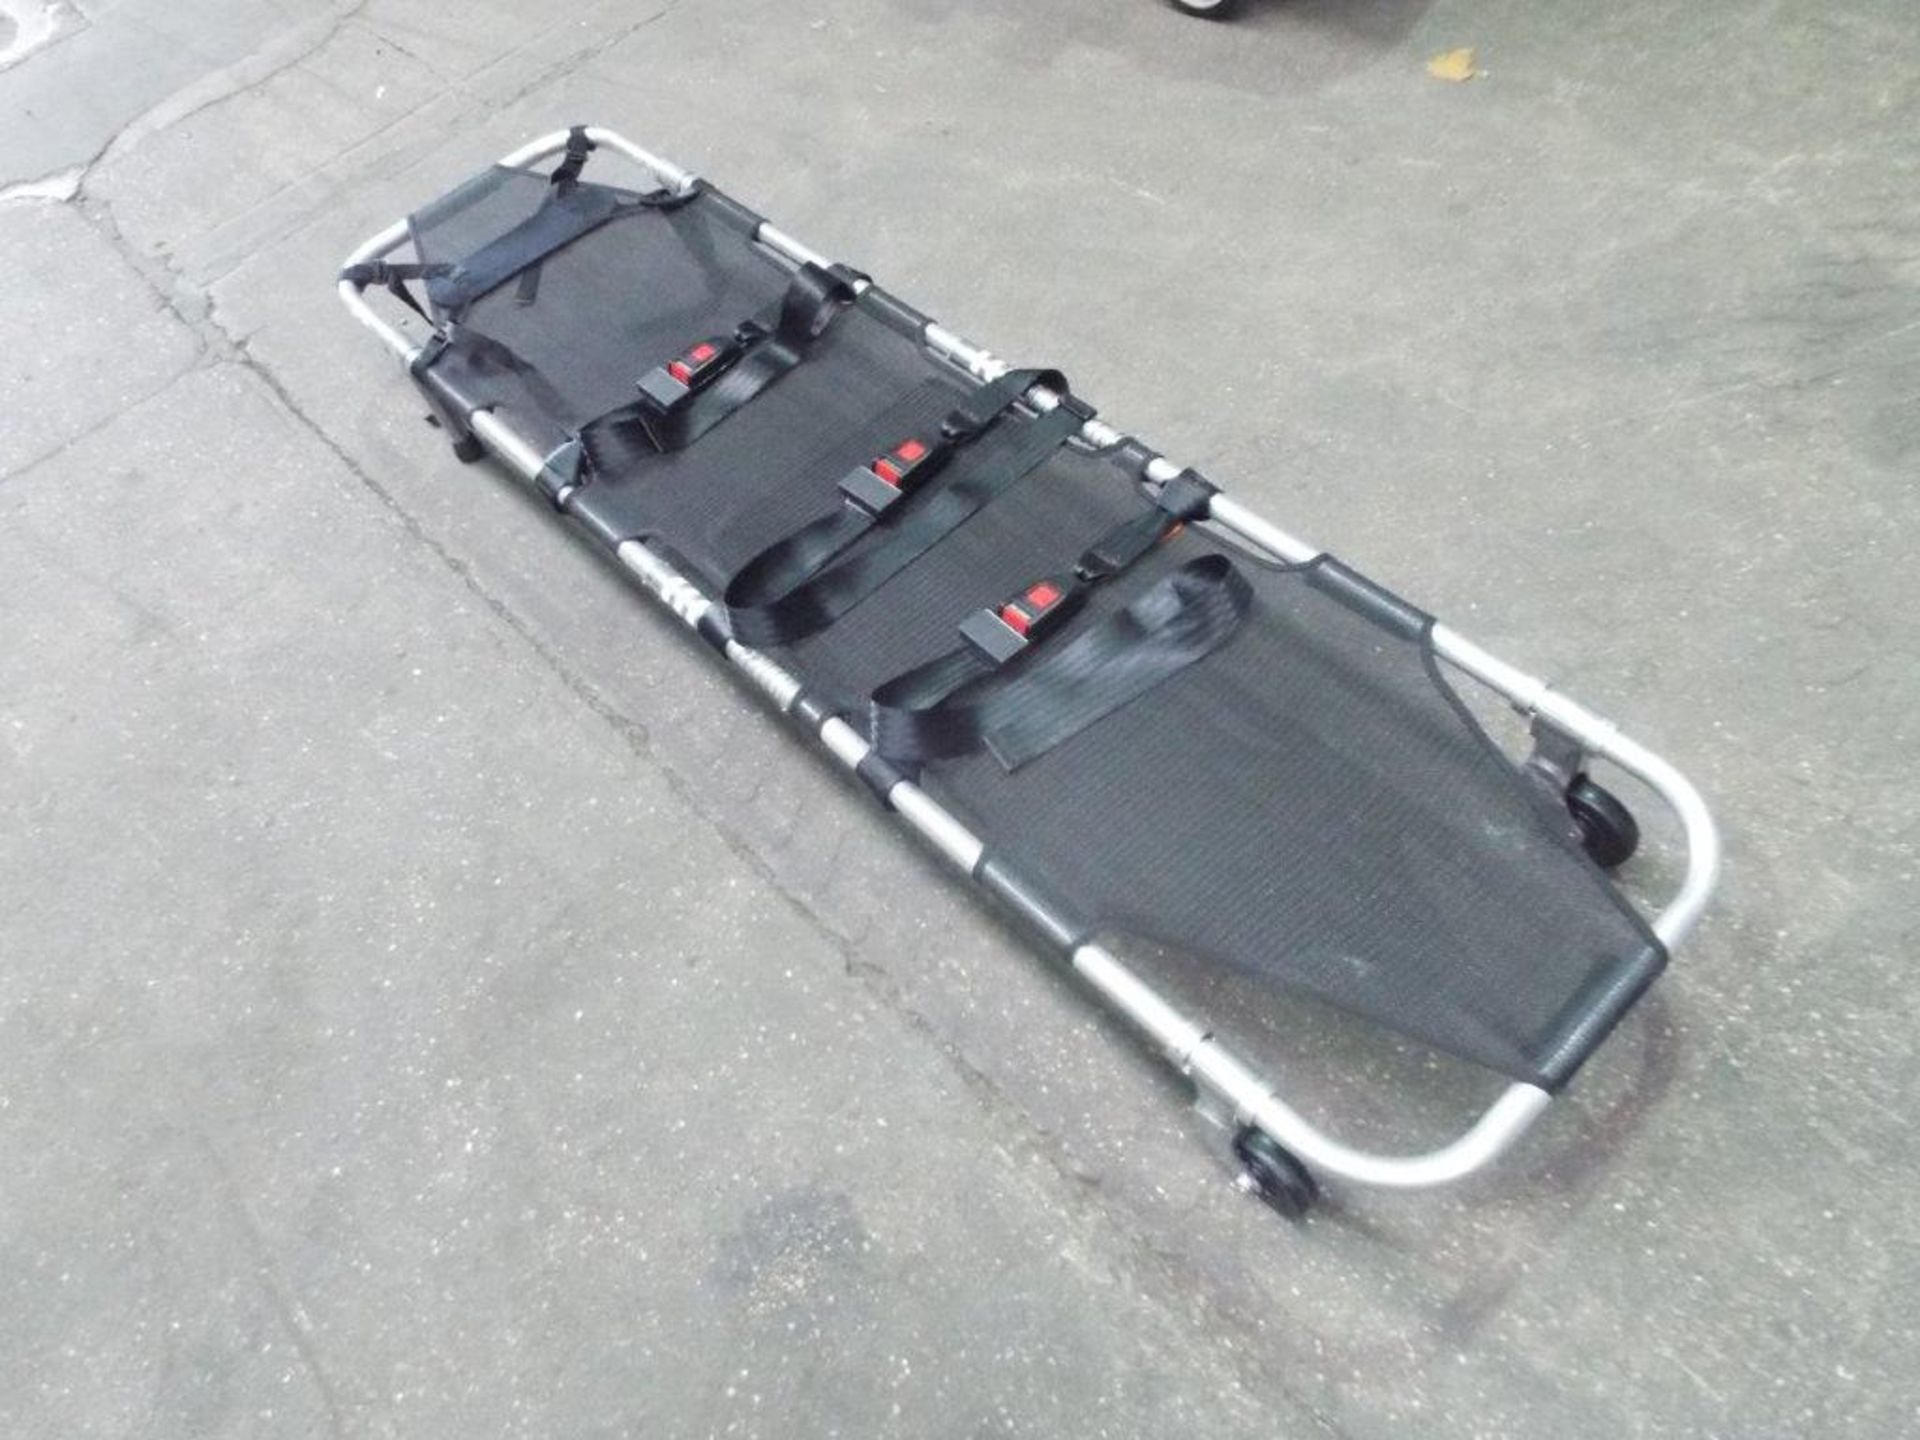 Ferno Folding Stretcher with Wheels and Straps